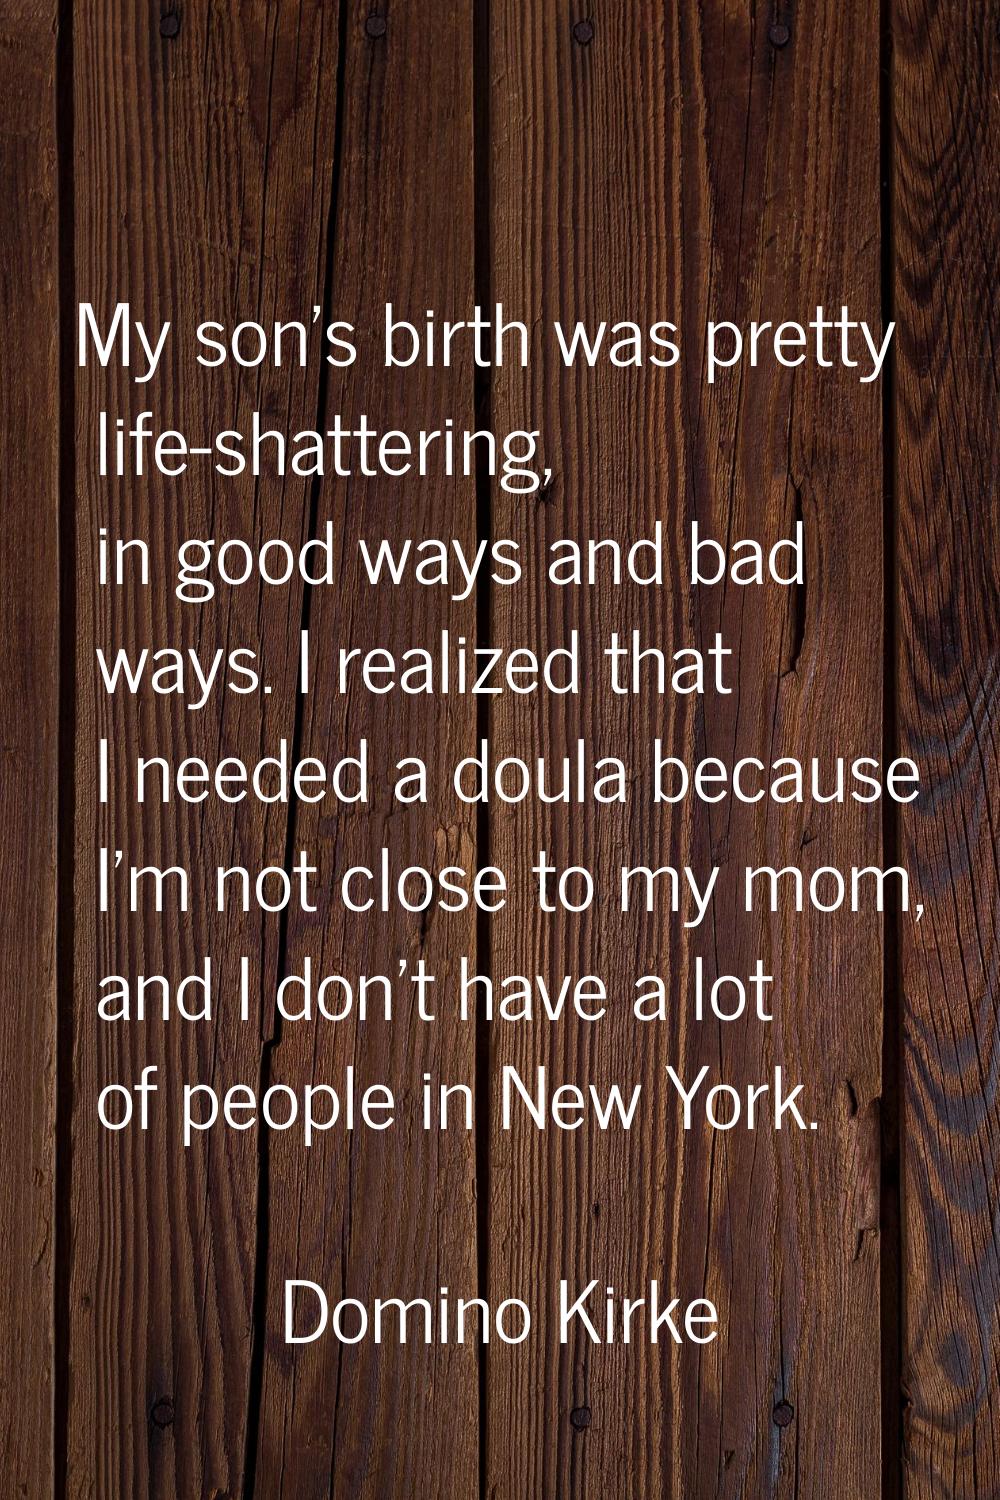 My son's birth was pretty life-shattering, in good ways and bad ways. I realized that I needed a do